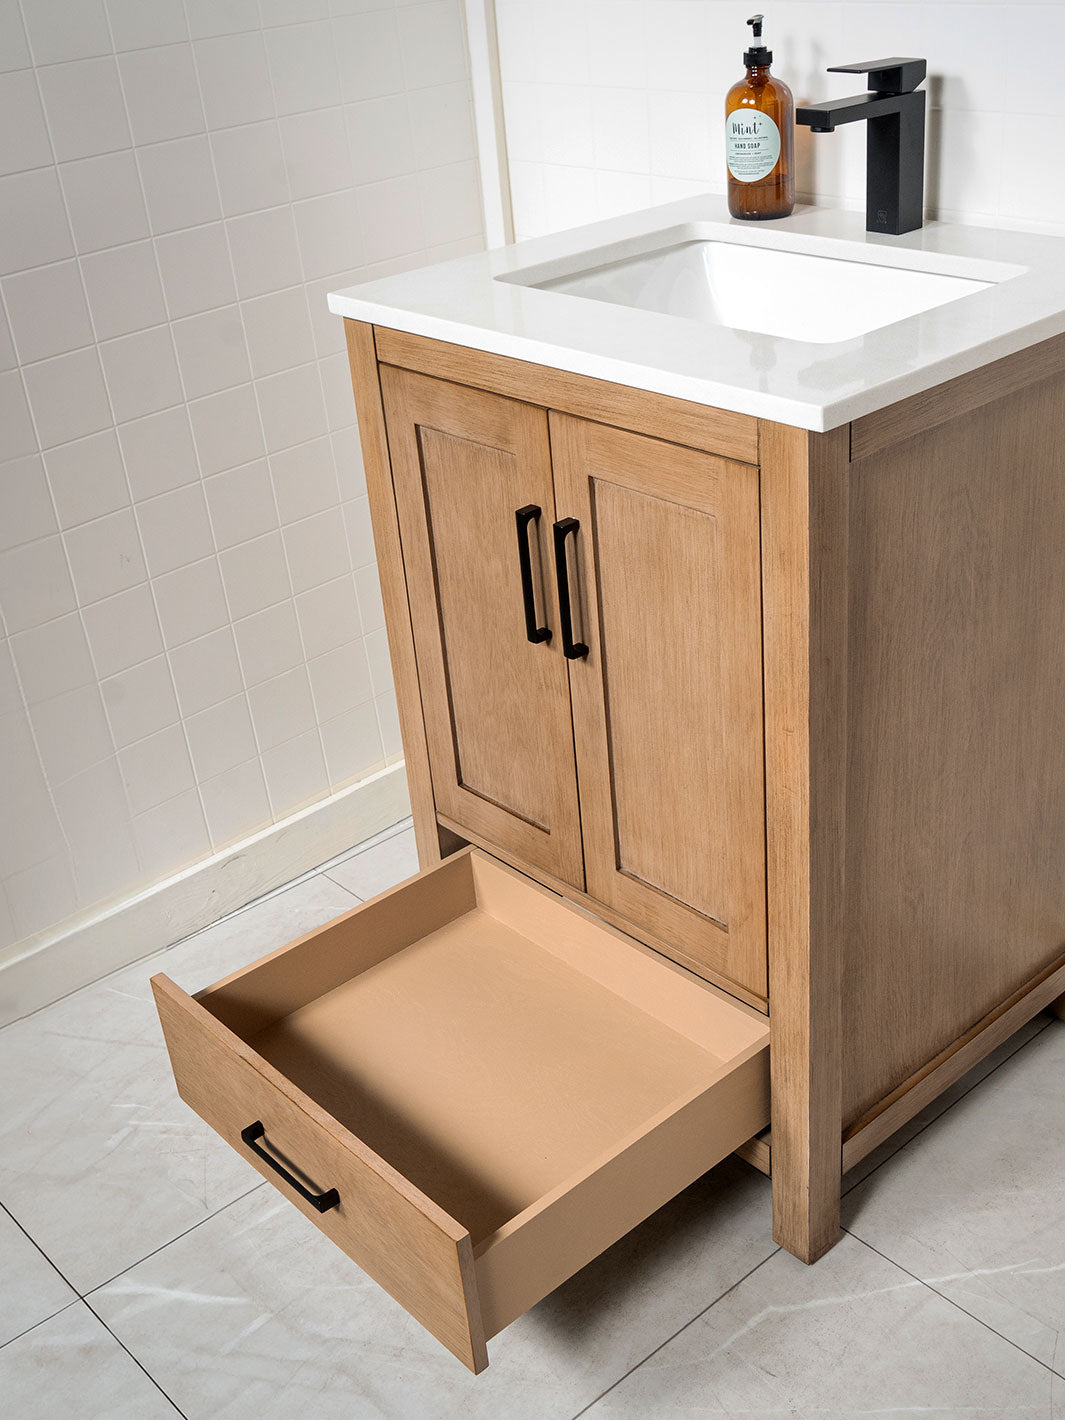 white oak vanity with matte black handles and faucet, bottom drawer and white quartz counter